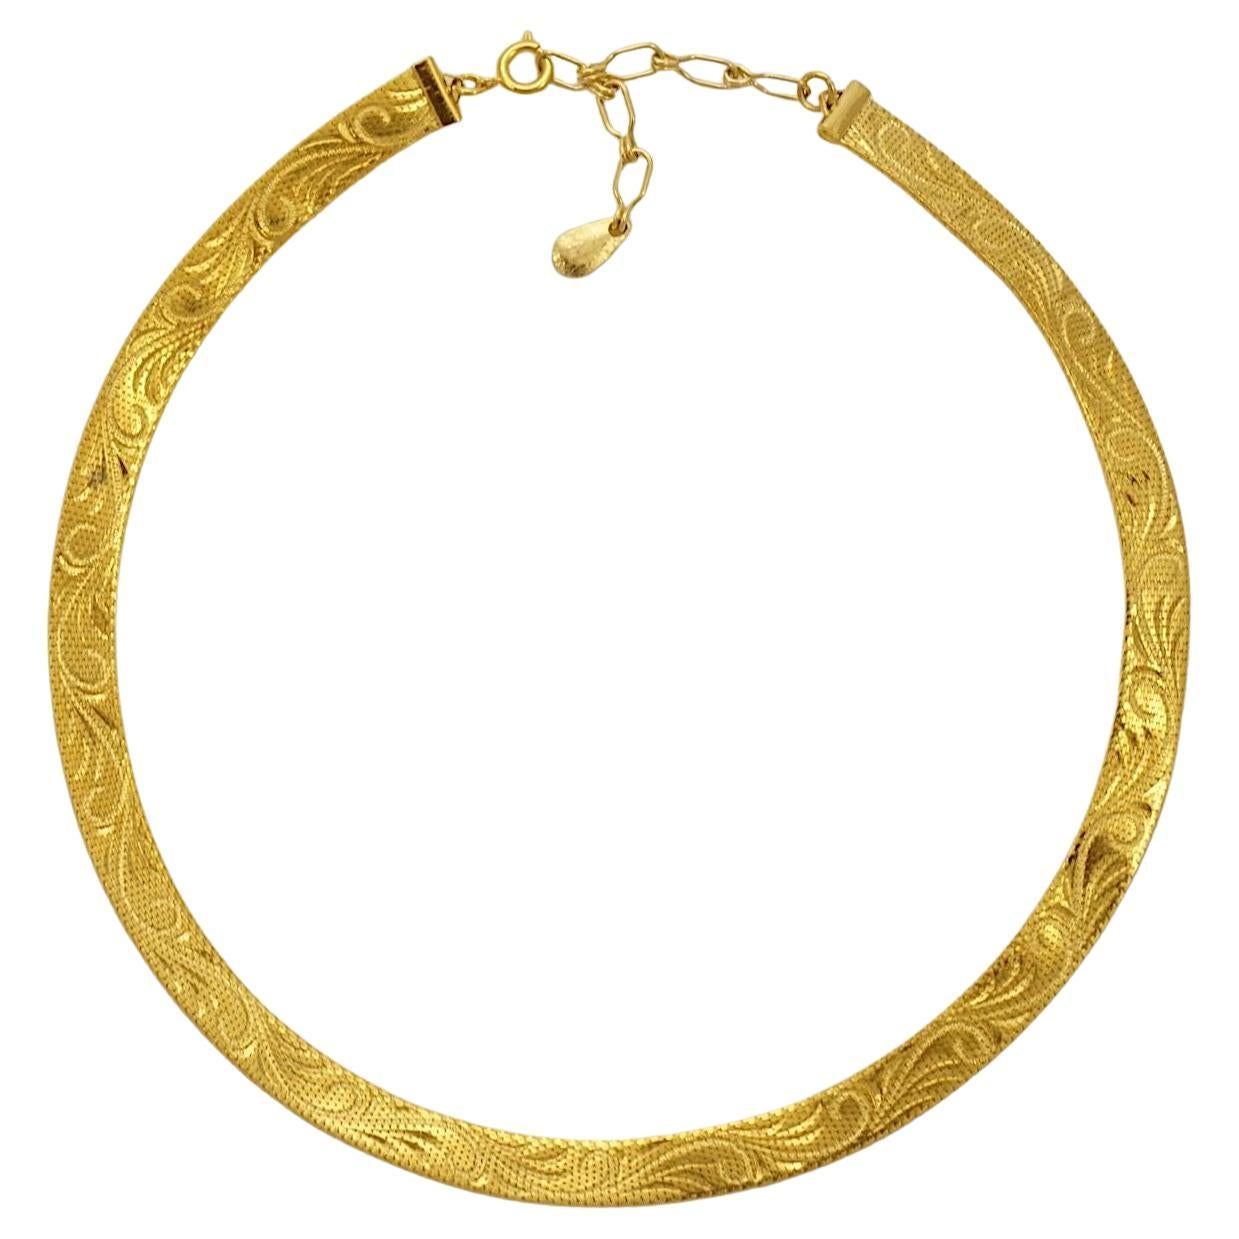 Gold Plated Swirl Design Egyptian Revival Mesh Collar Necklace circa 1980s